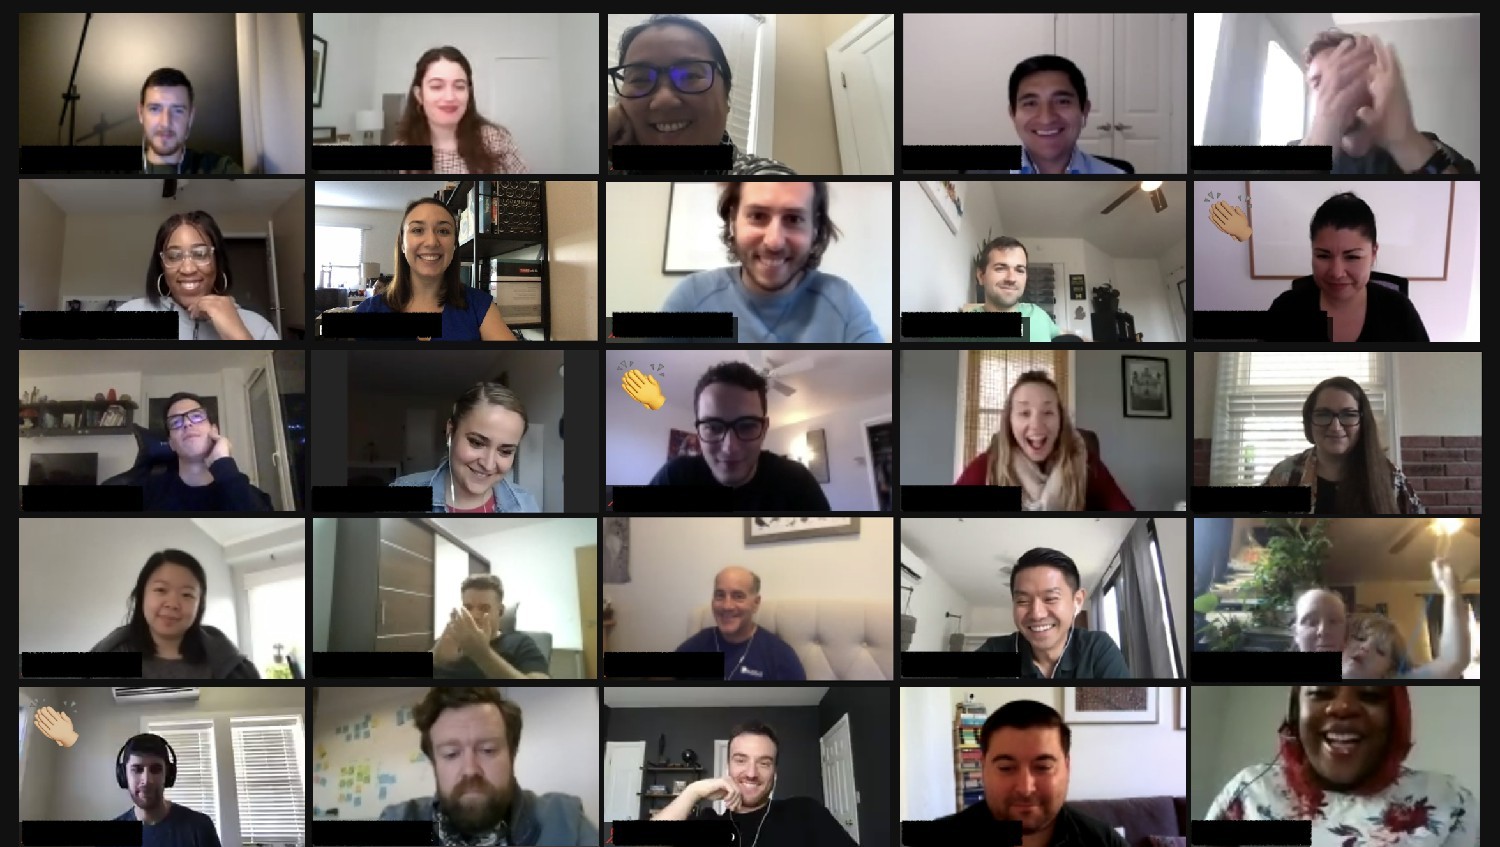 Kasa has been a remote company since 2016, so our global team connects via video for the bi-weekly All Hands meeting